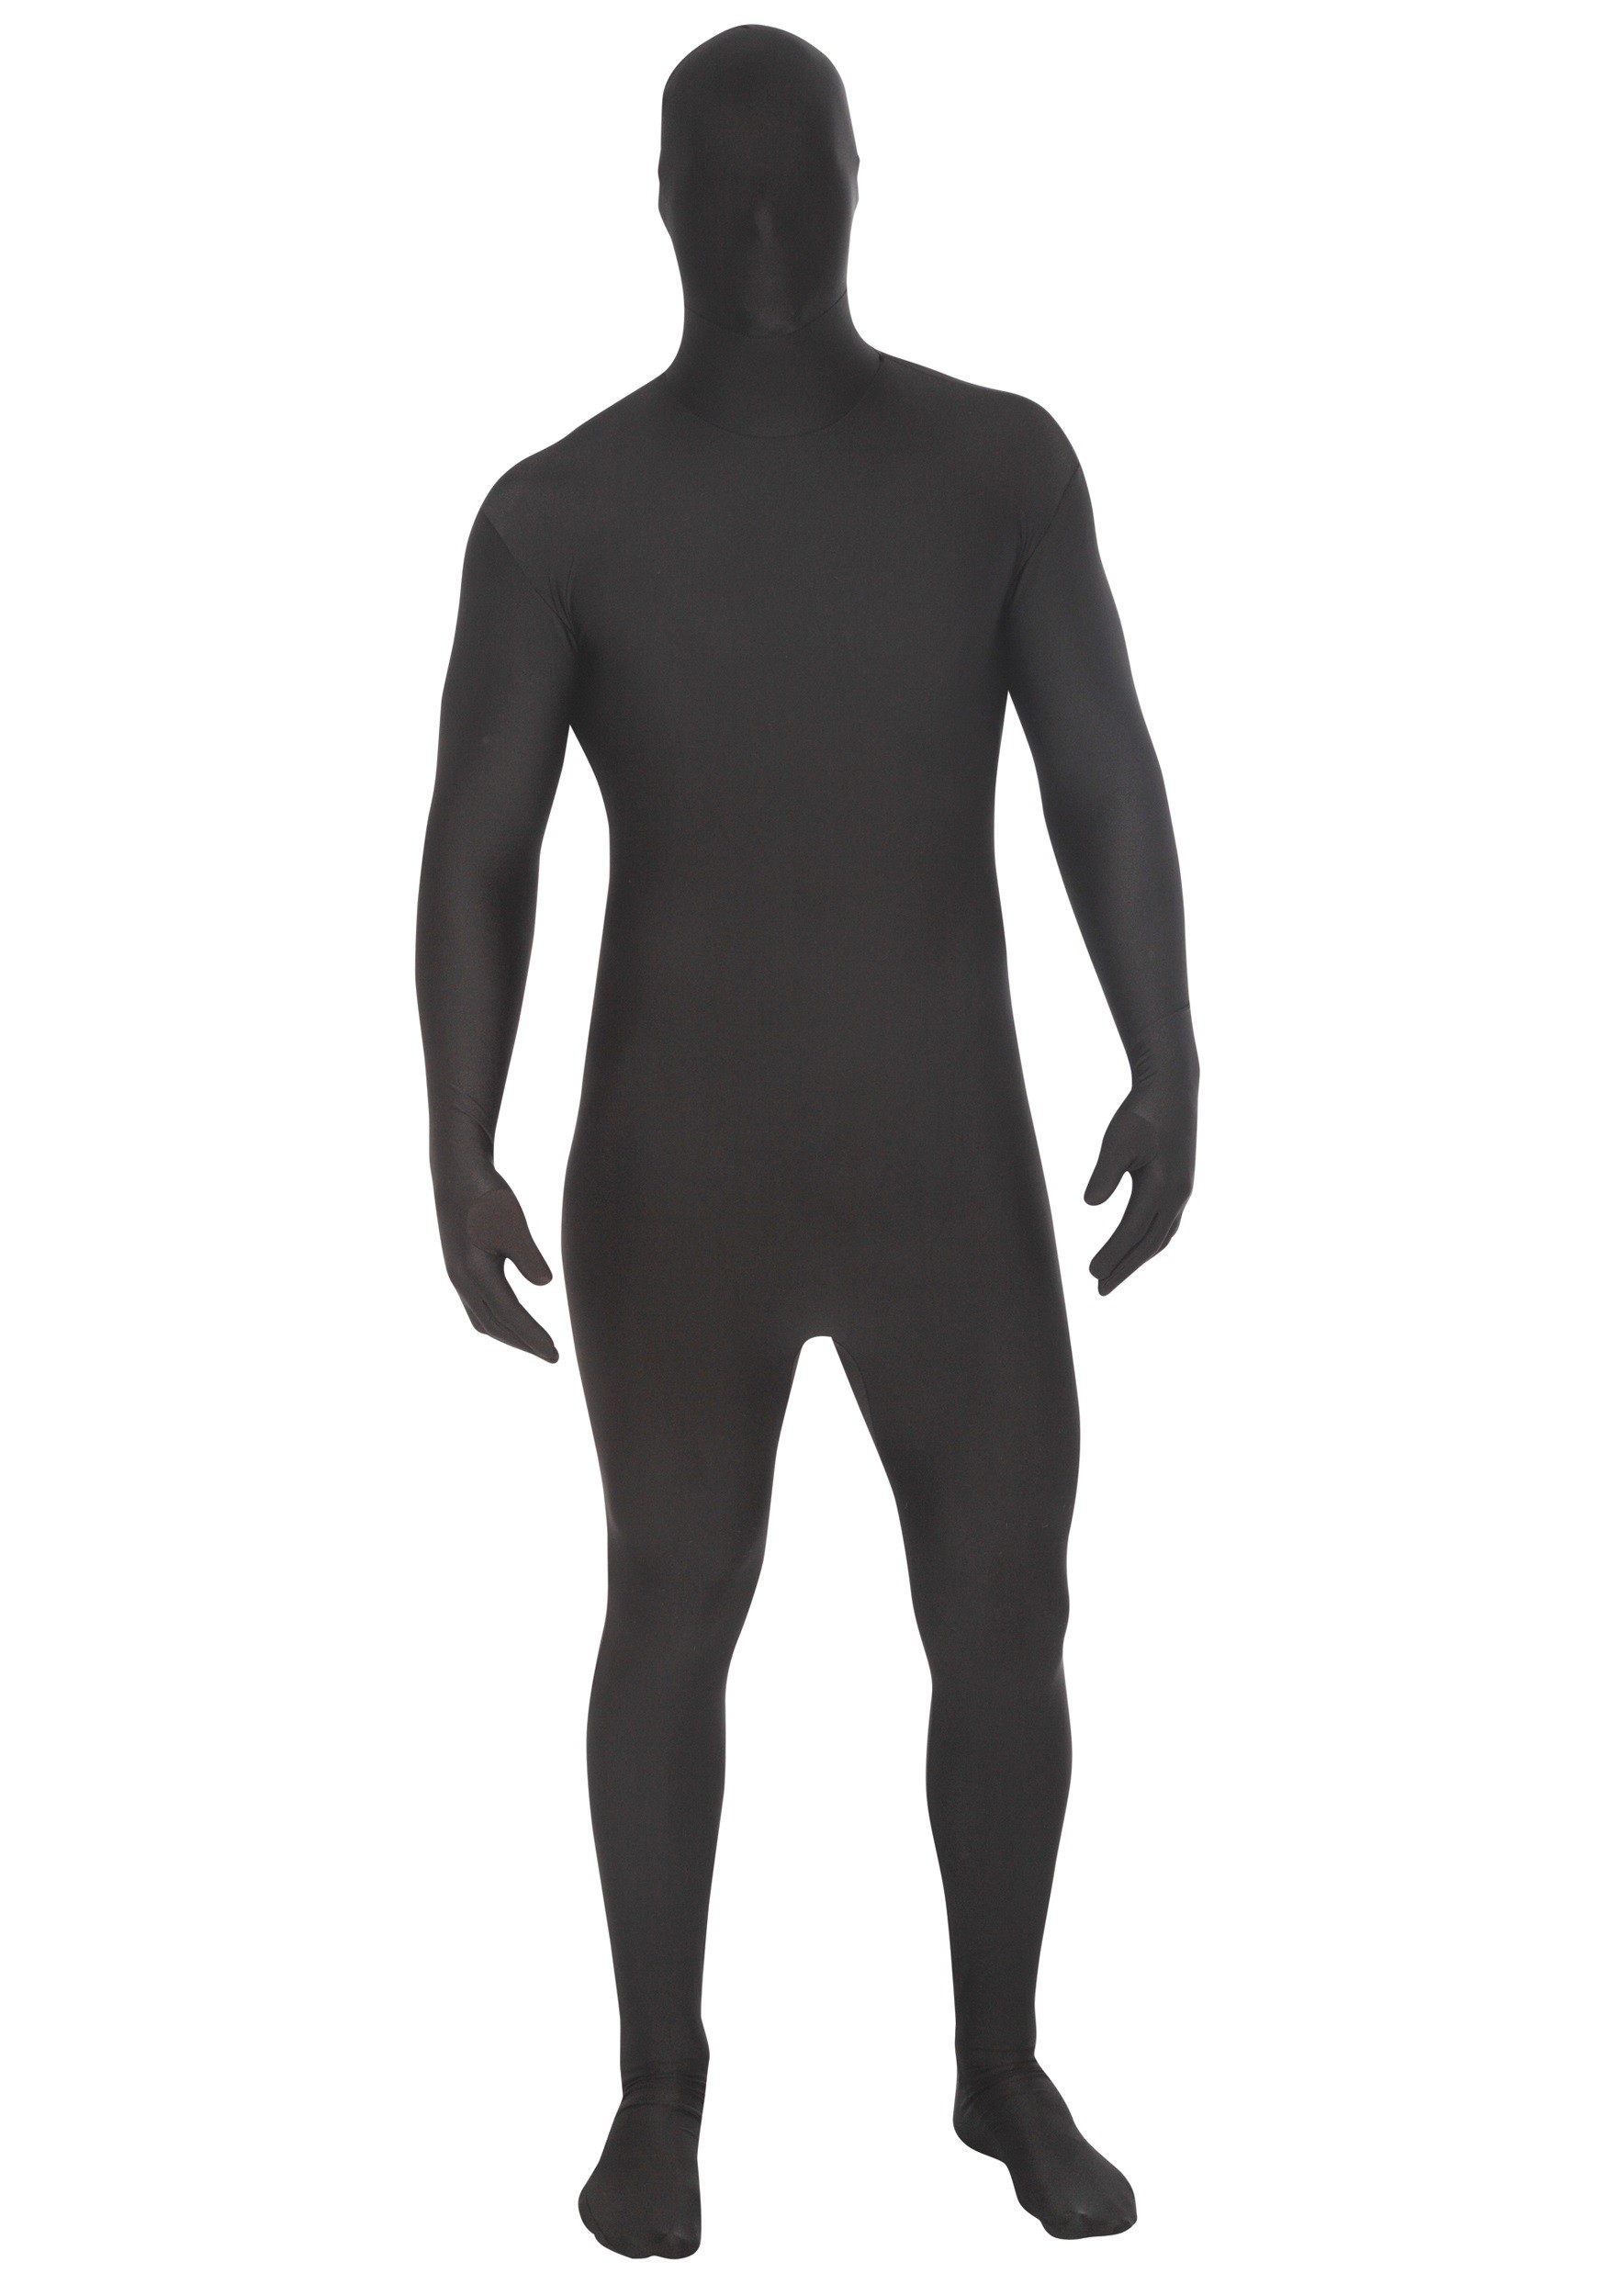 Black Morphsuit Costume For Adults